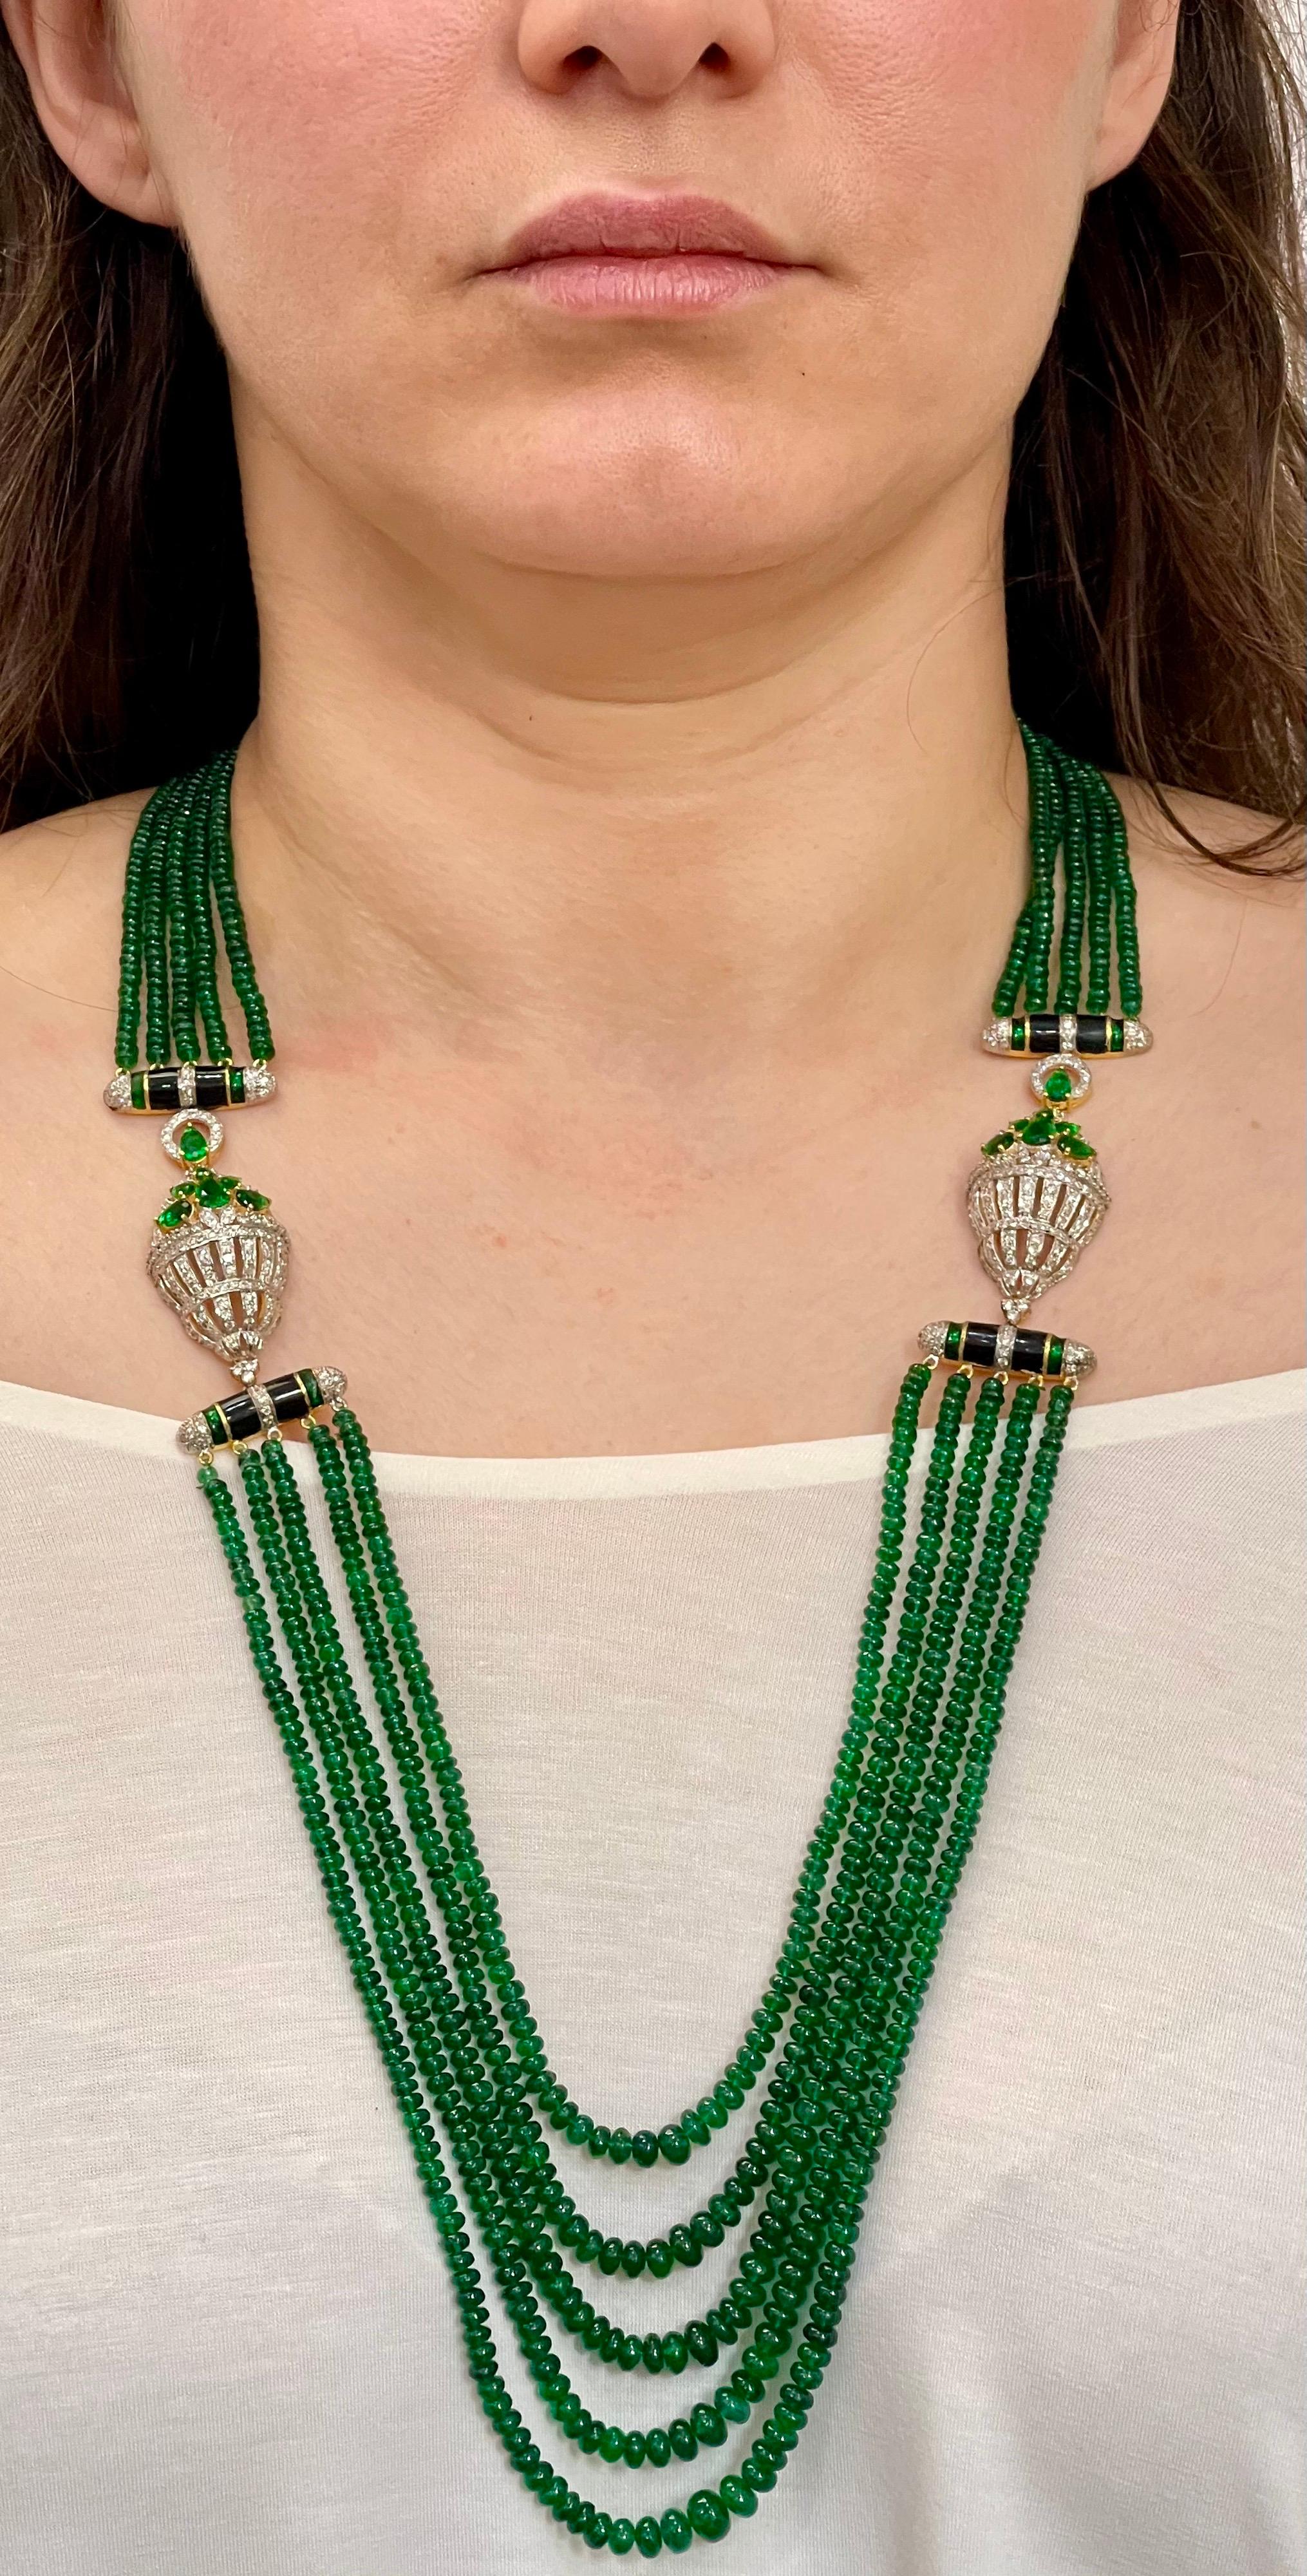 335 Carat 5-Strand Emerald Necklace with 6.5 Carat Diamond & Enamel in 14k Gold For Sale 6